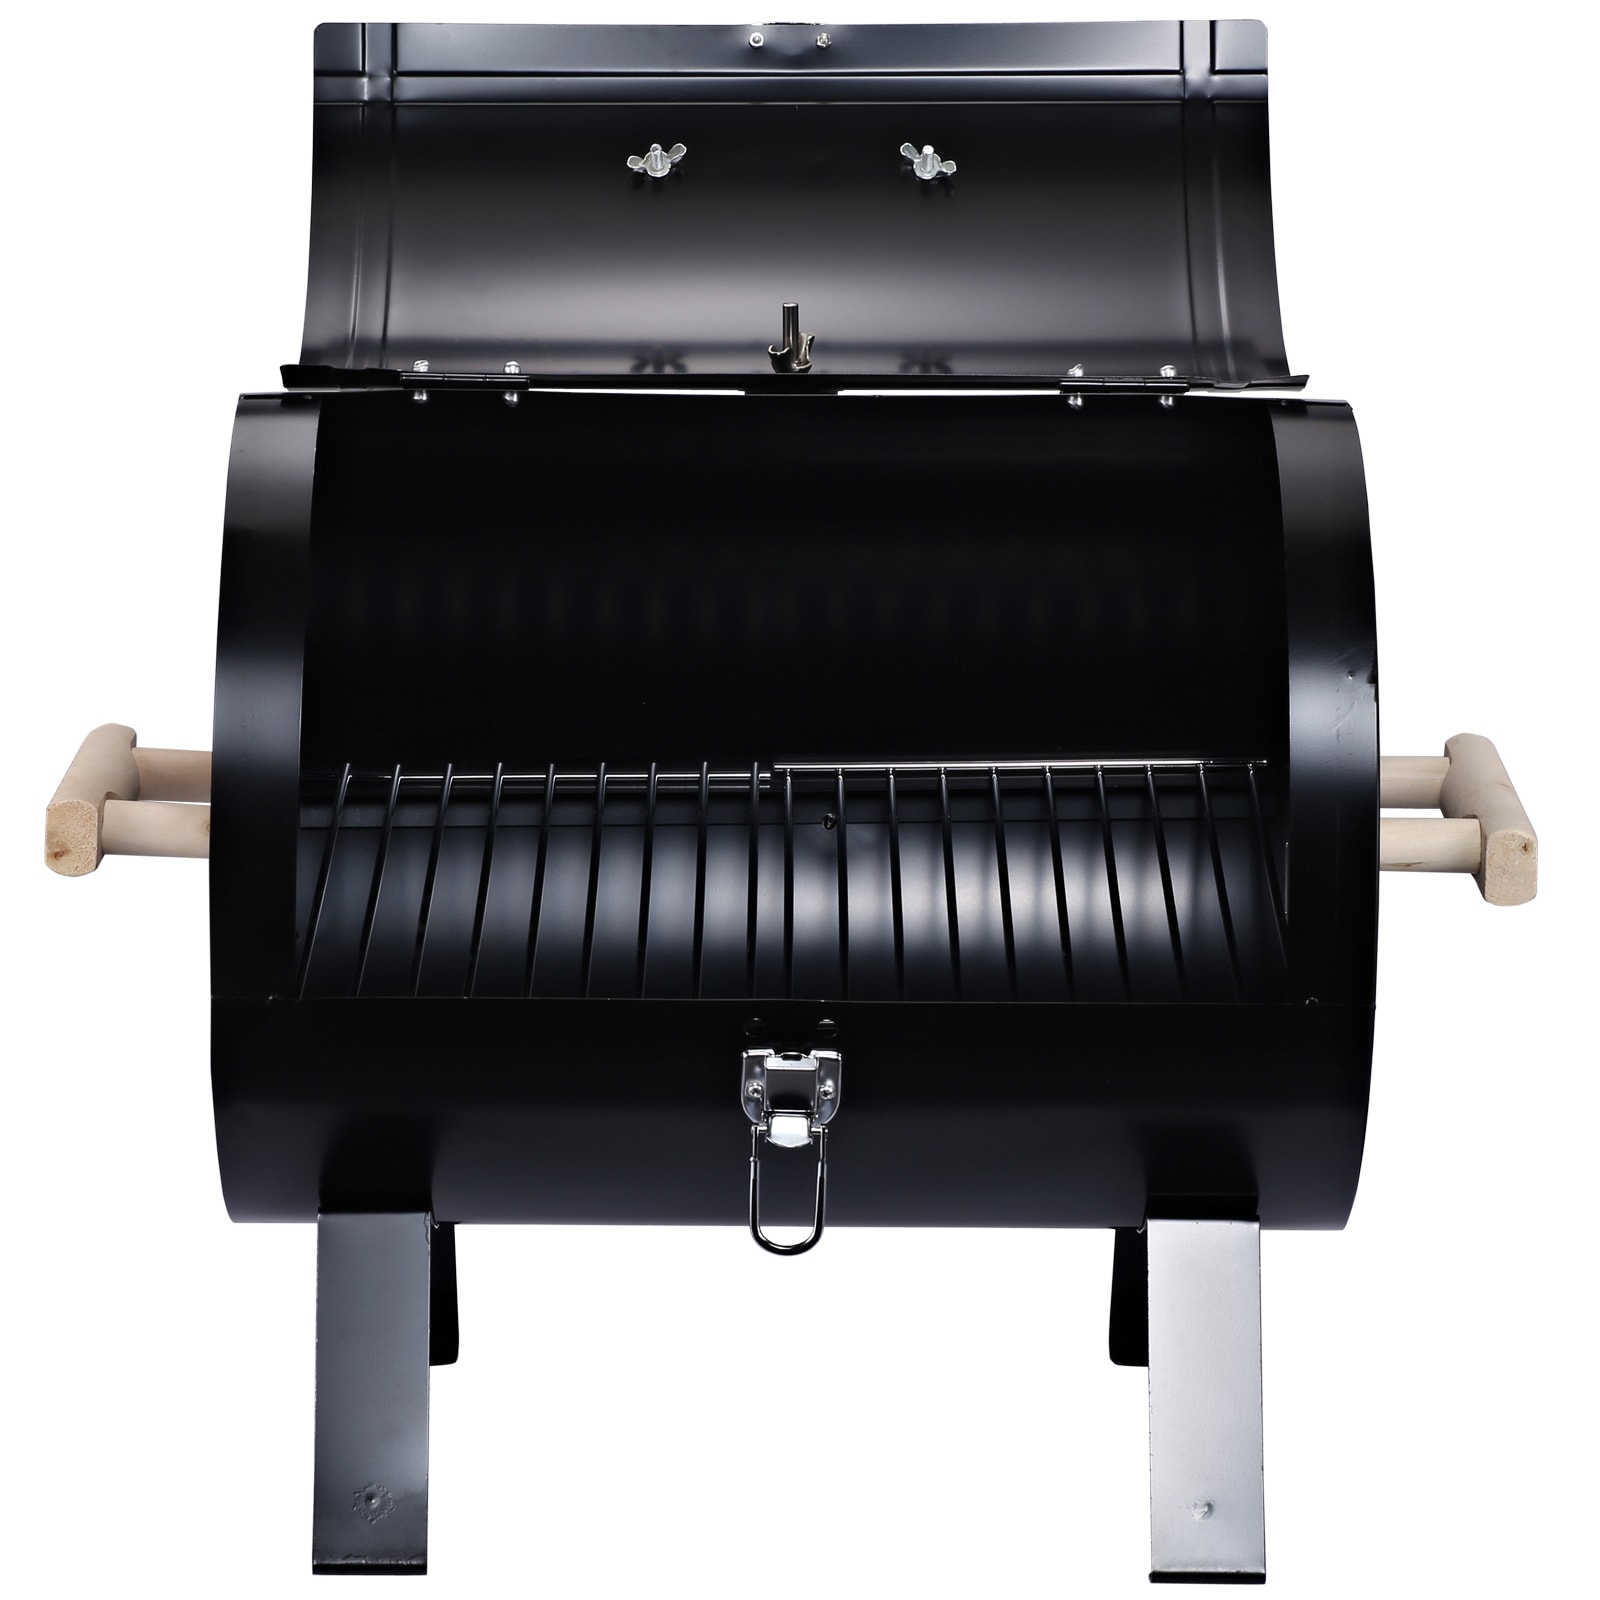 Portable Charcoal Outdoor BBQ Grill For Camping With Travel Bag - Small  Tabletop Smoke ＆ Smokeless Pan Optional - Built In Electric Fan Power  Supplied